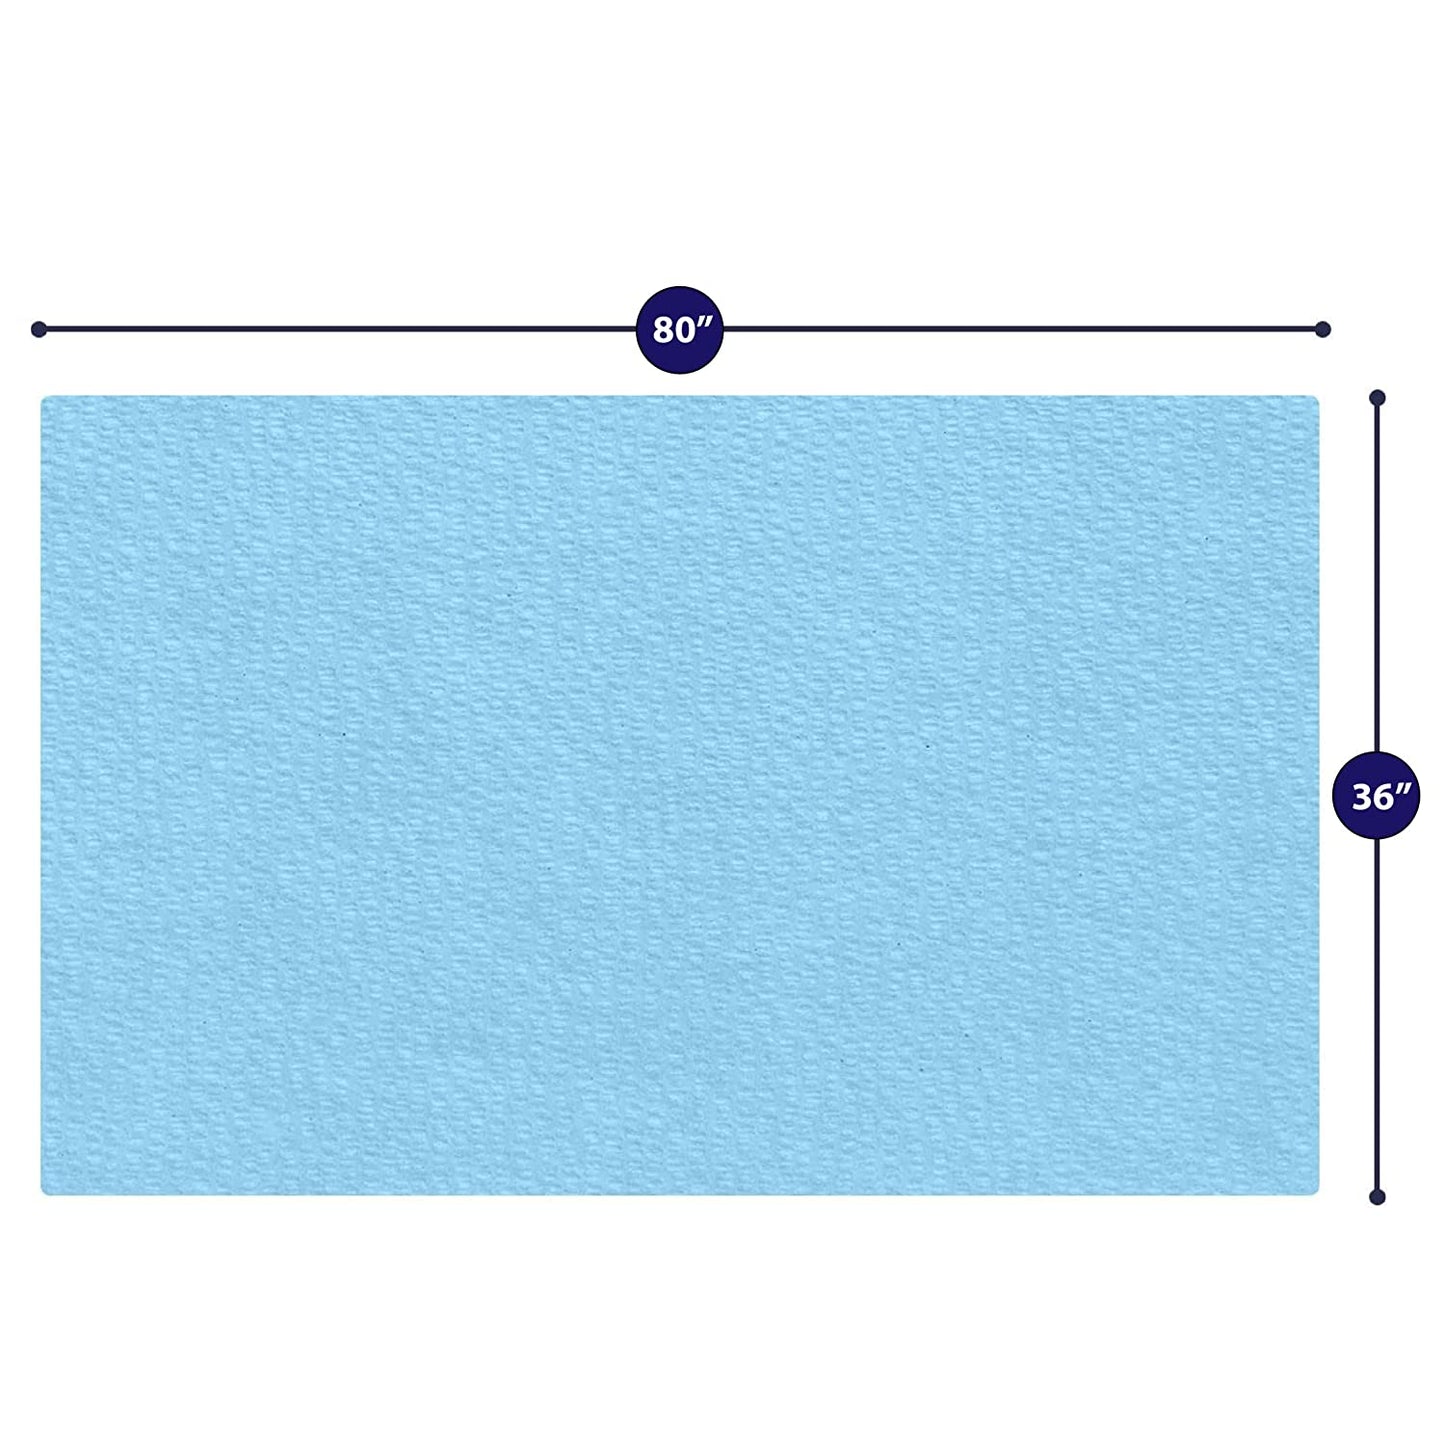 Disposable Stretcher Bed Sheet - 36" x 80" x 6" - DisposableGowns.com